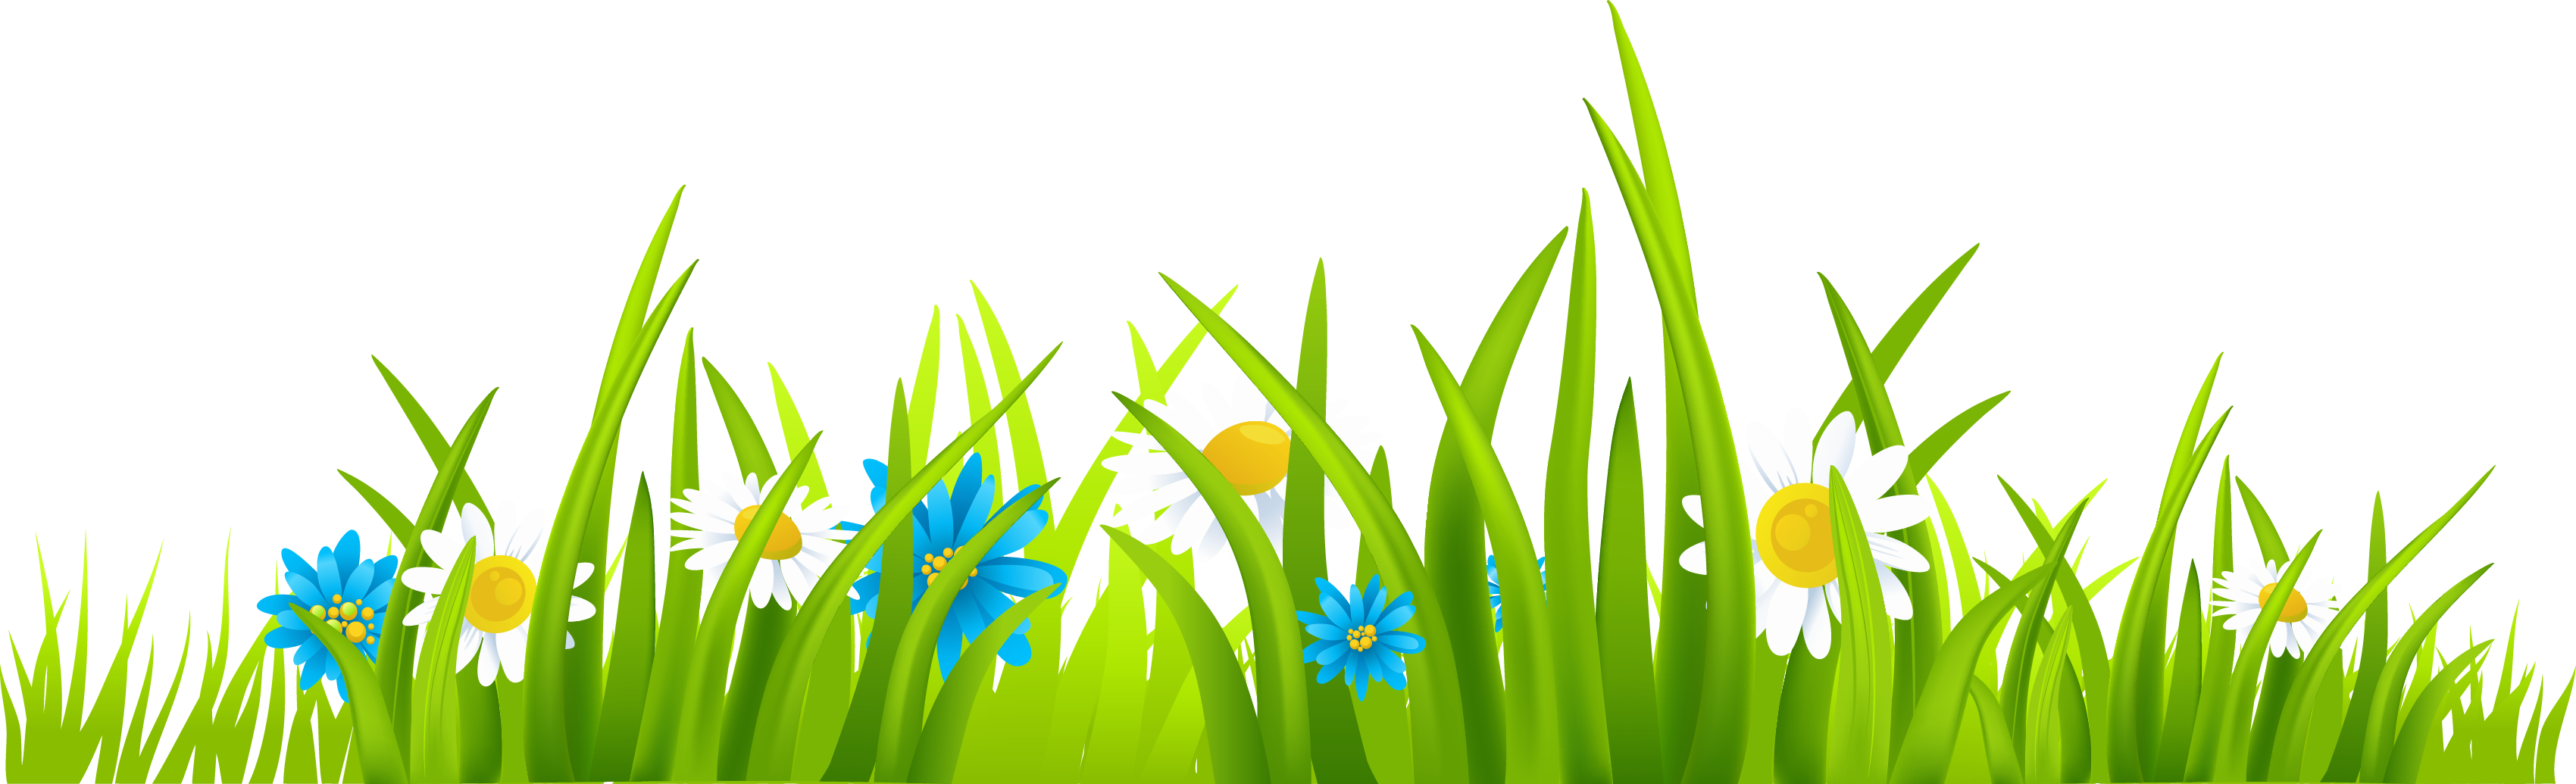 Grass clip art free free clipart images 3